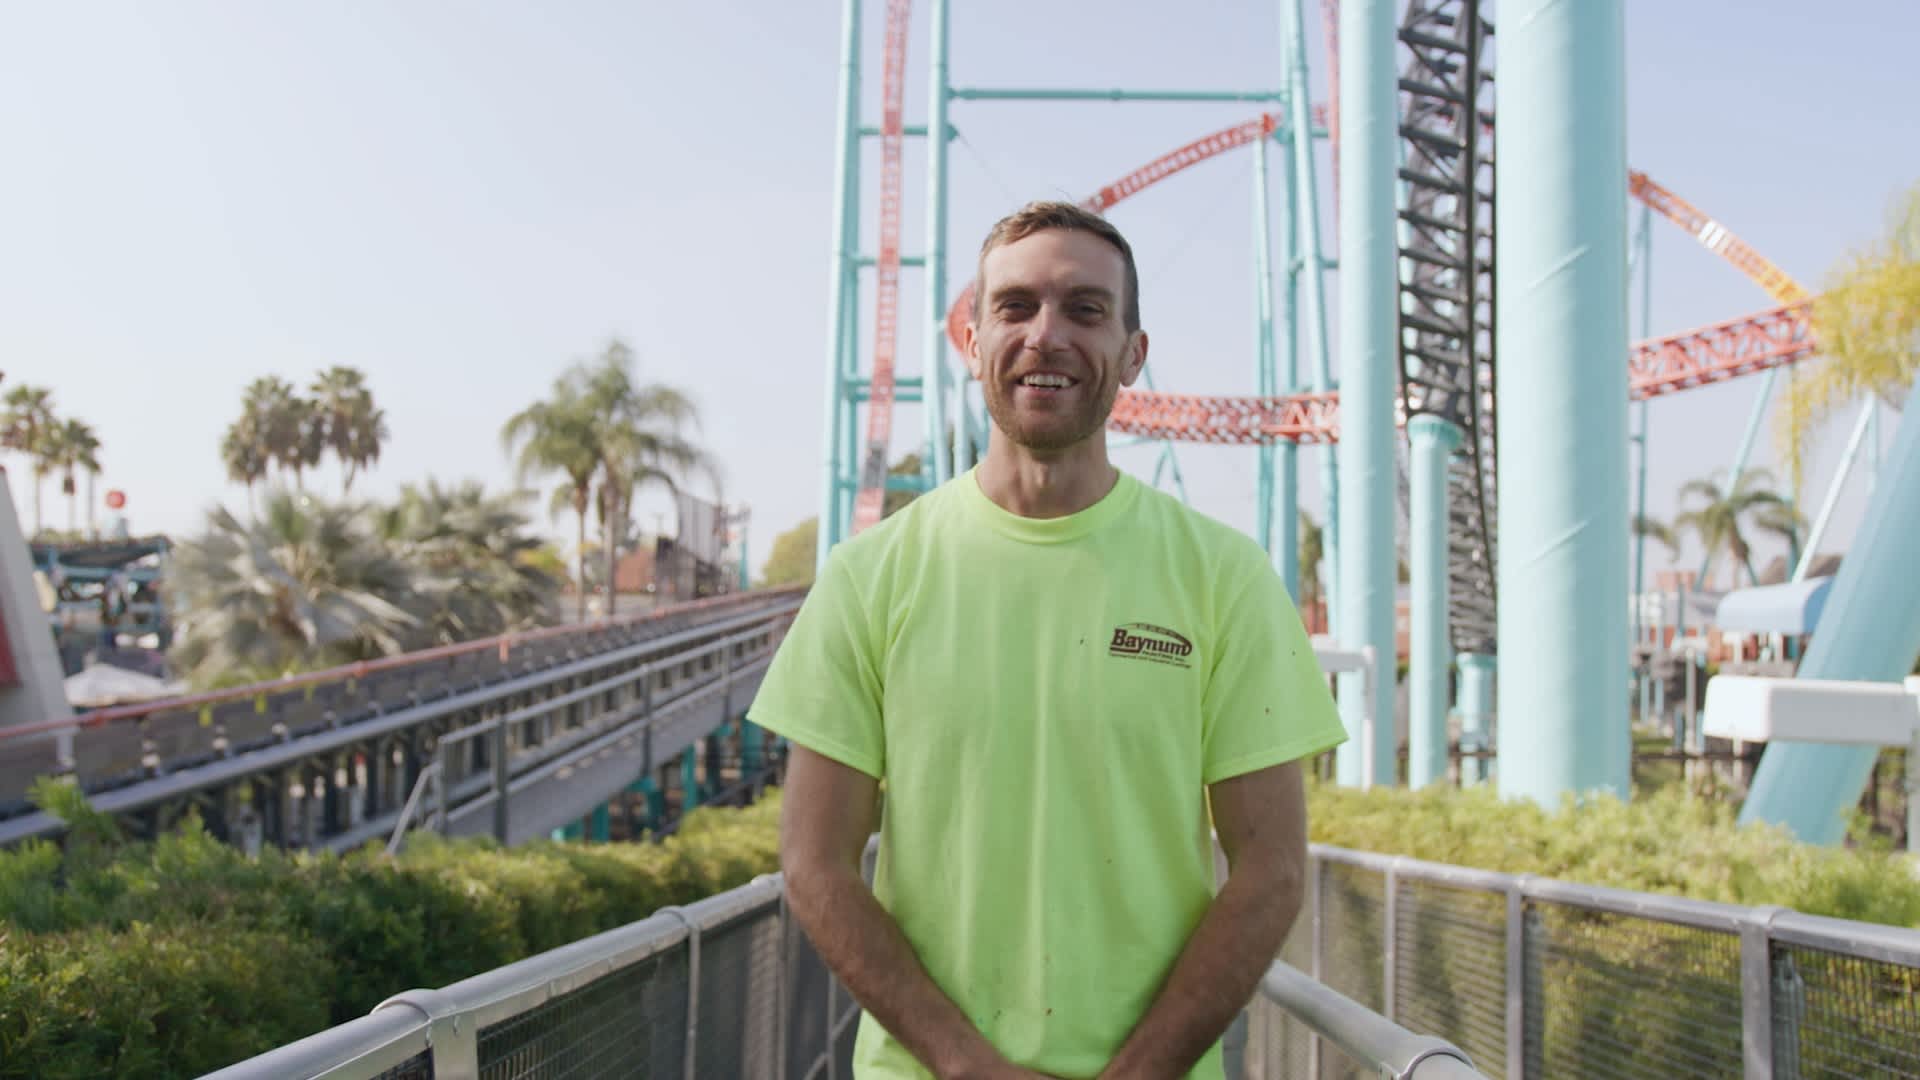 On the job: What it takes to earn ,000 per year painting roller coasters in Kentucky—and around the world